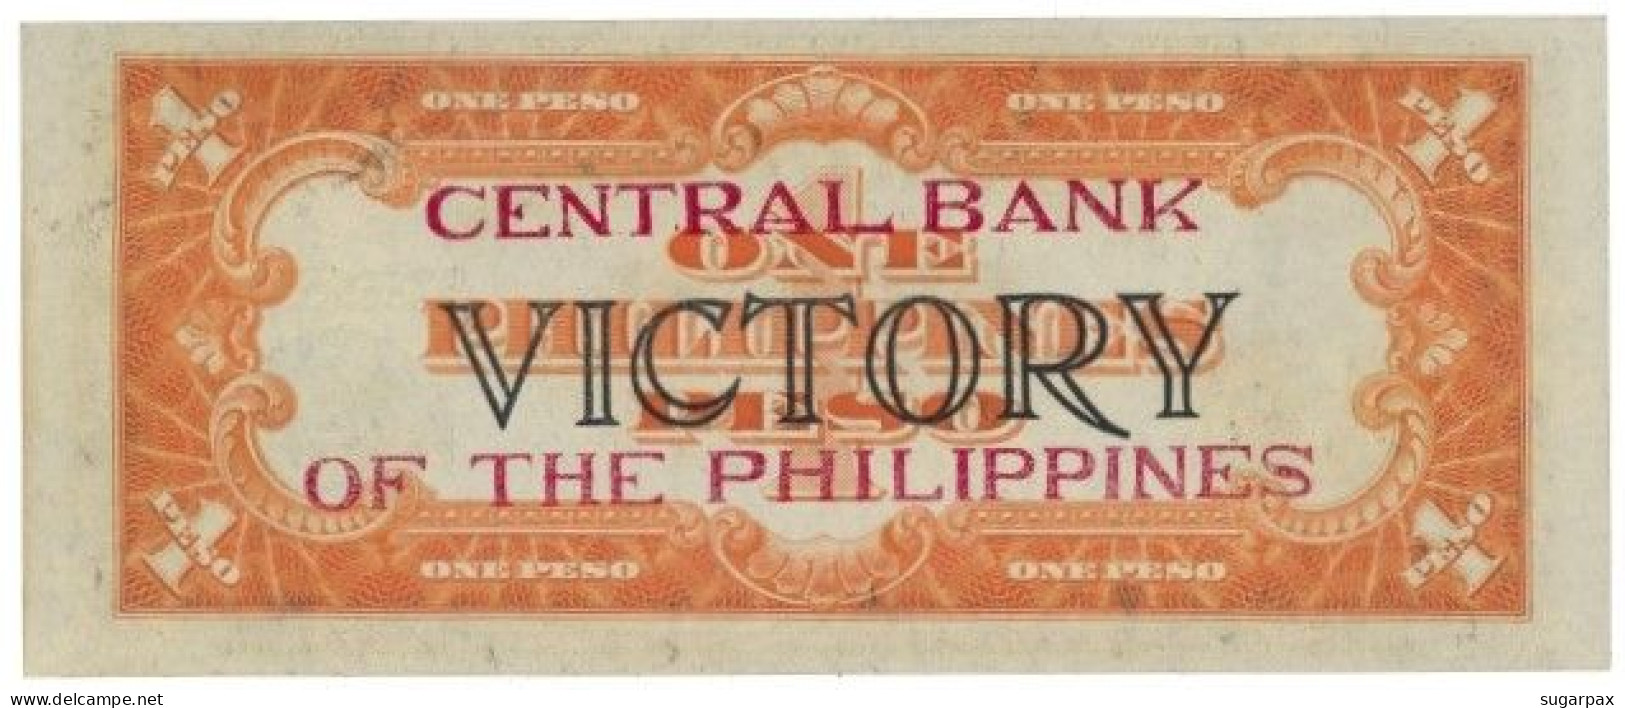 Philippines - 1 Peso - ND ( 1949 ) - Pick 117 - AUNC. - Serie VICTORY With RED Overprint CENTRAL BANK OF PHILIPPINES - Philippines